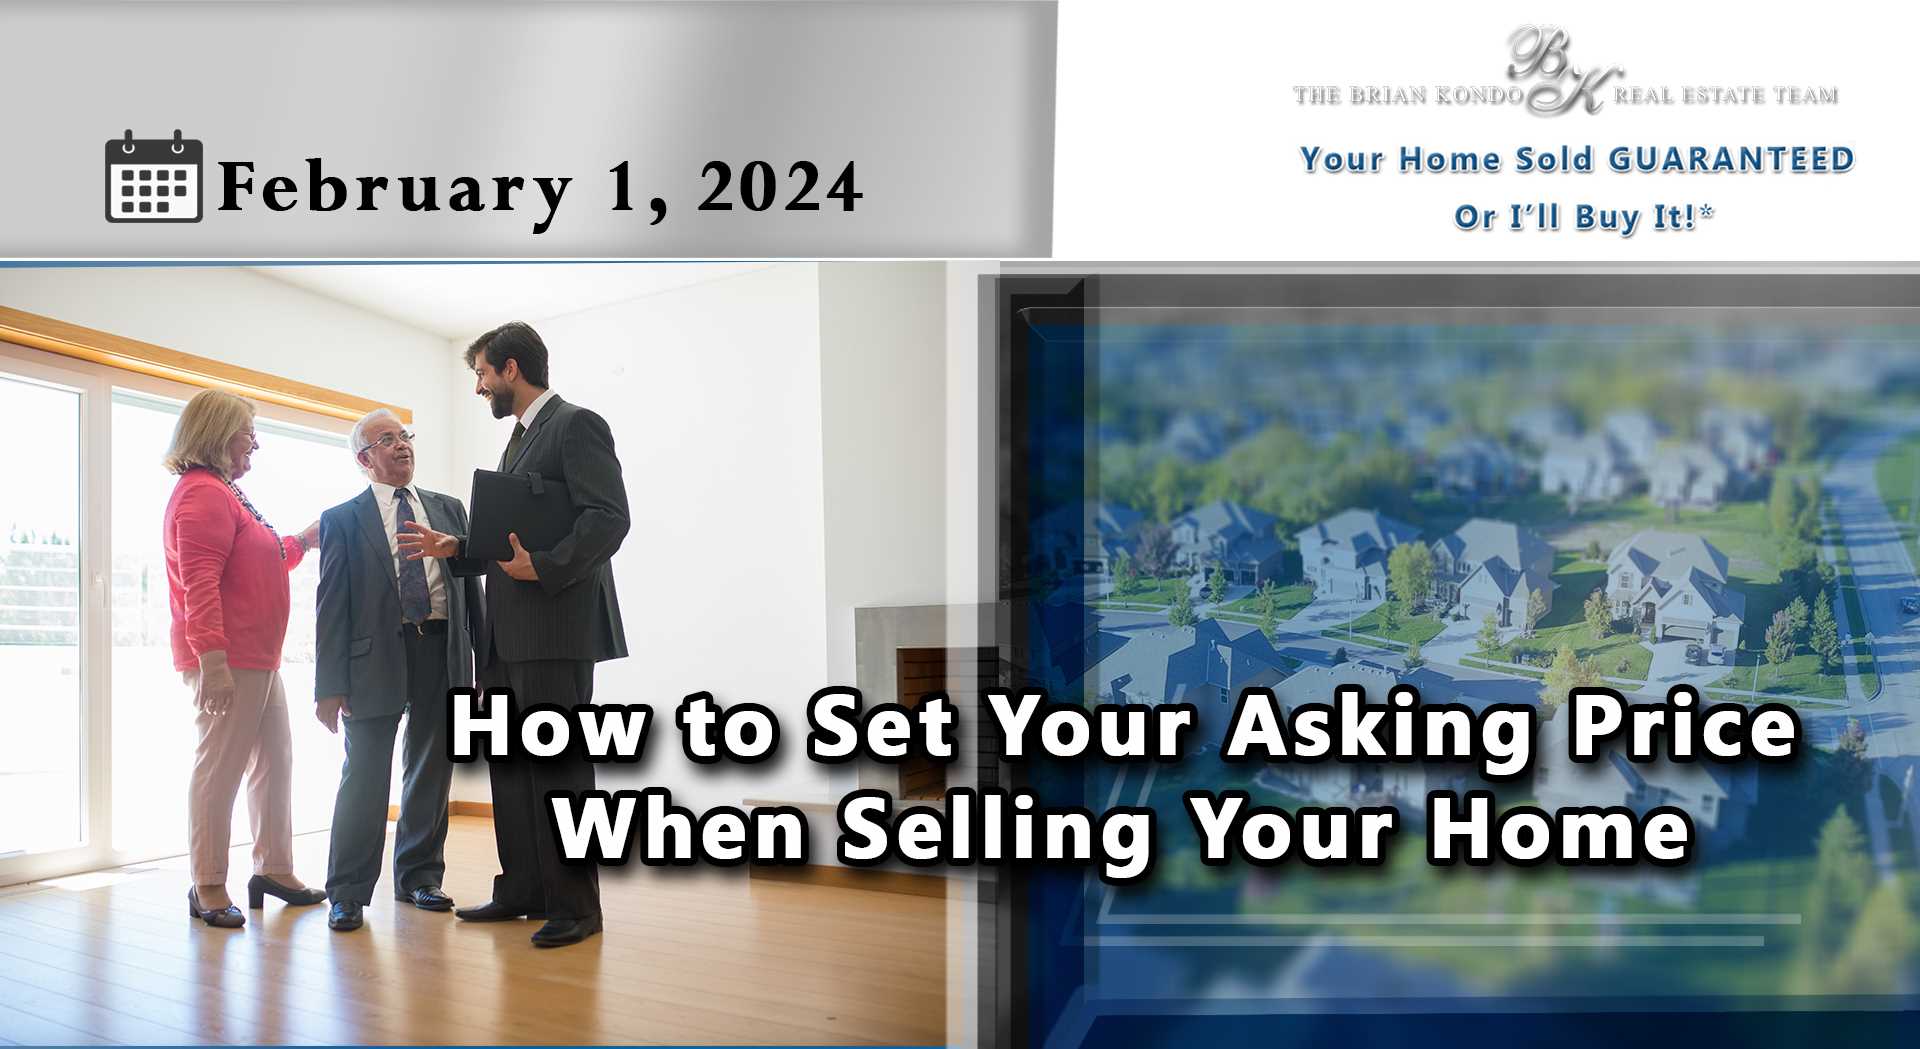 How to Set Your Asking Price When Selling Your Home